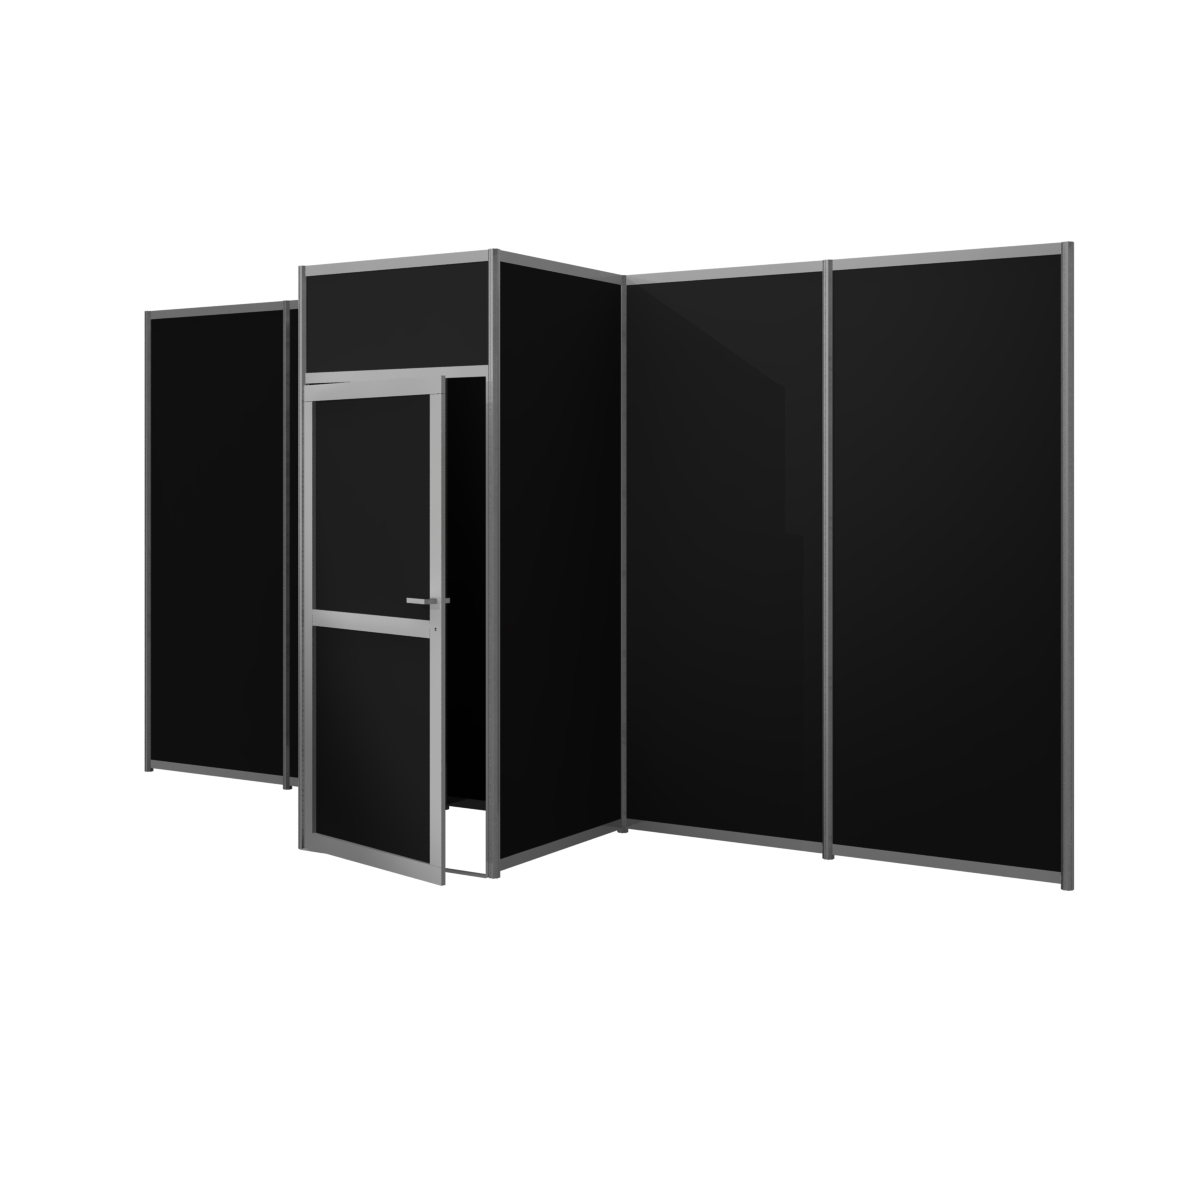 Aluminum frame storage cabinet on the back partition with melamine infill - Black